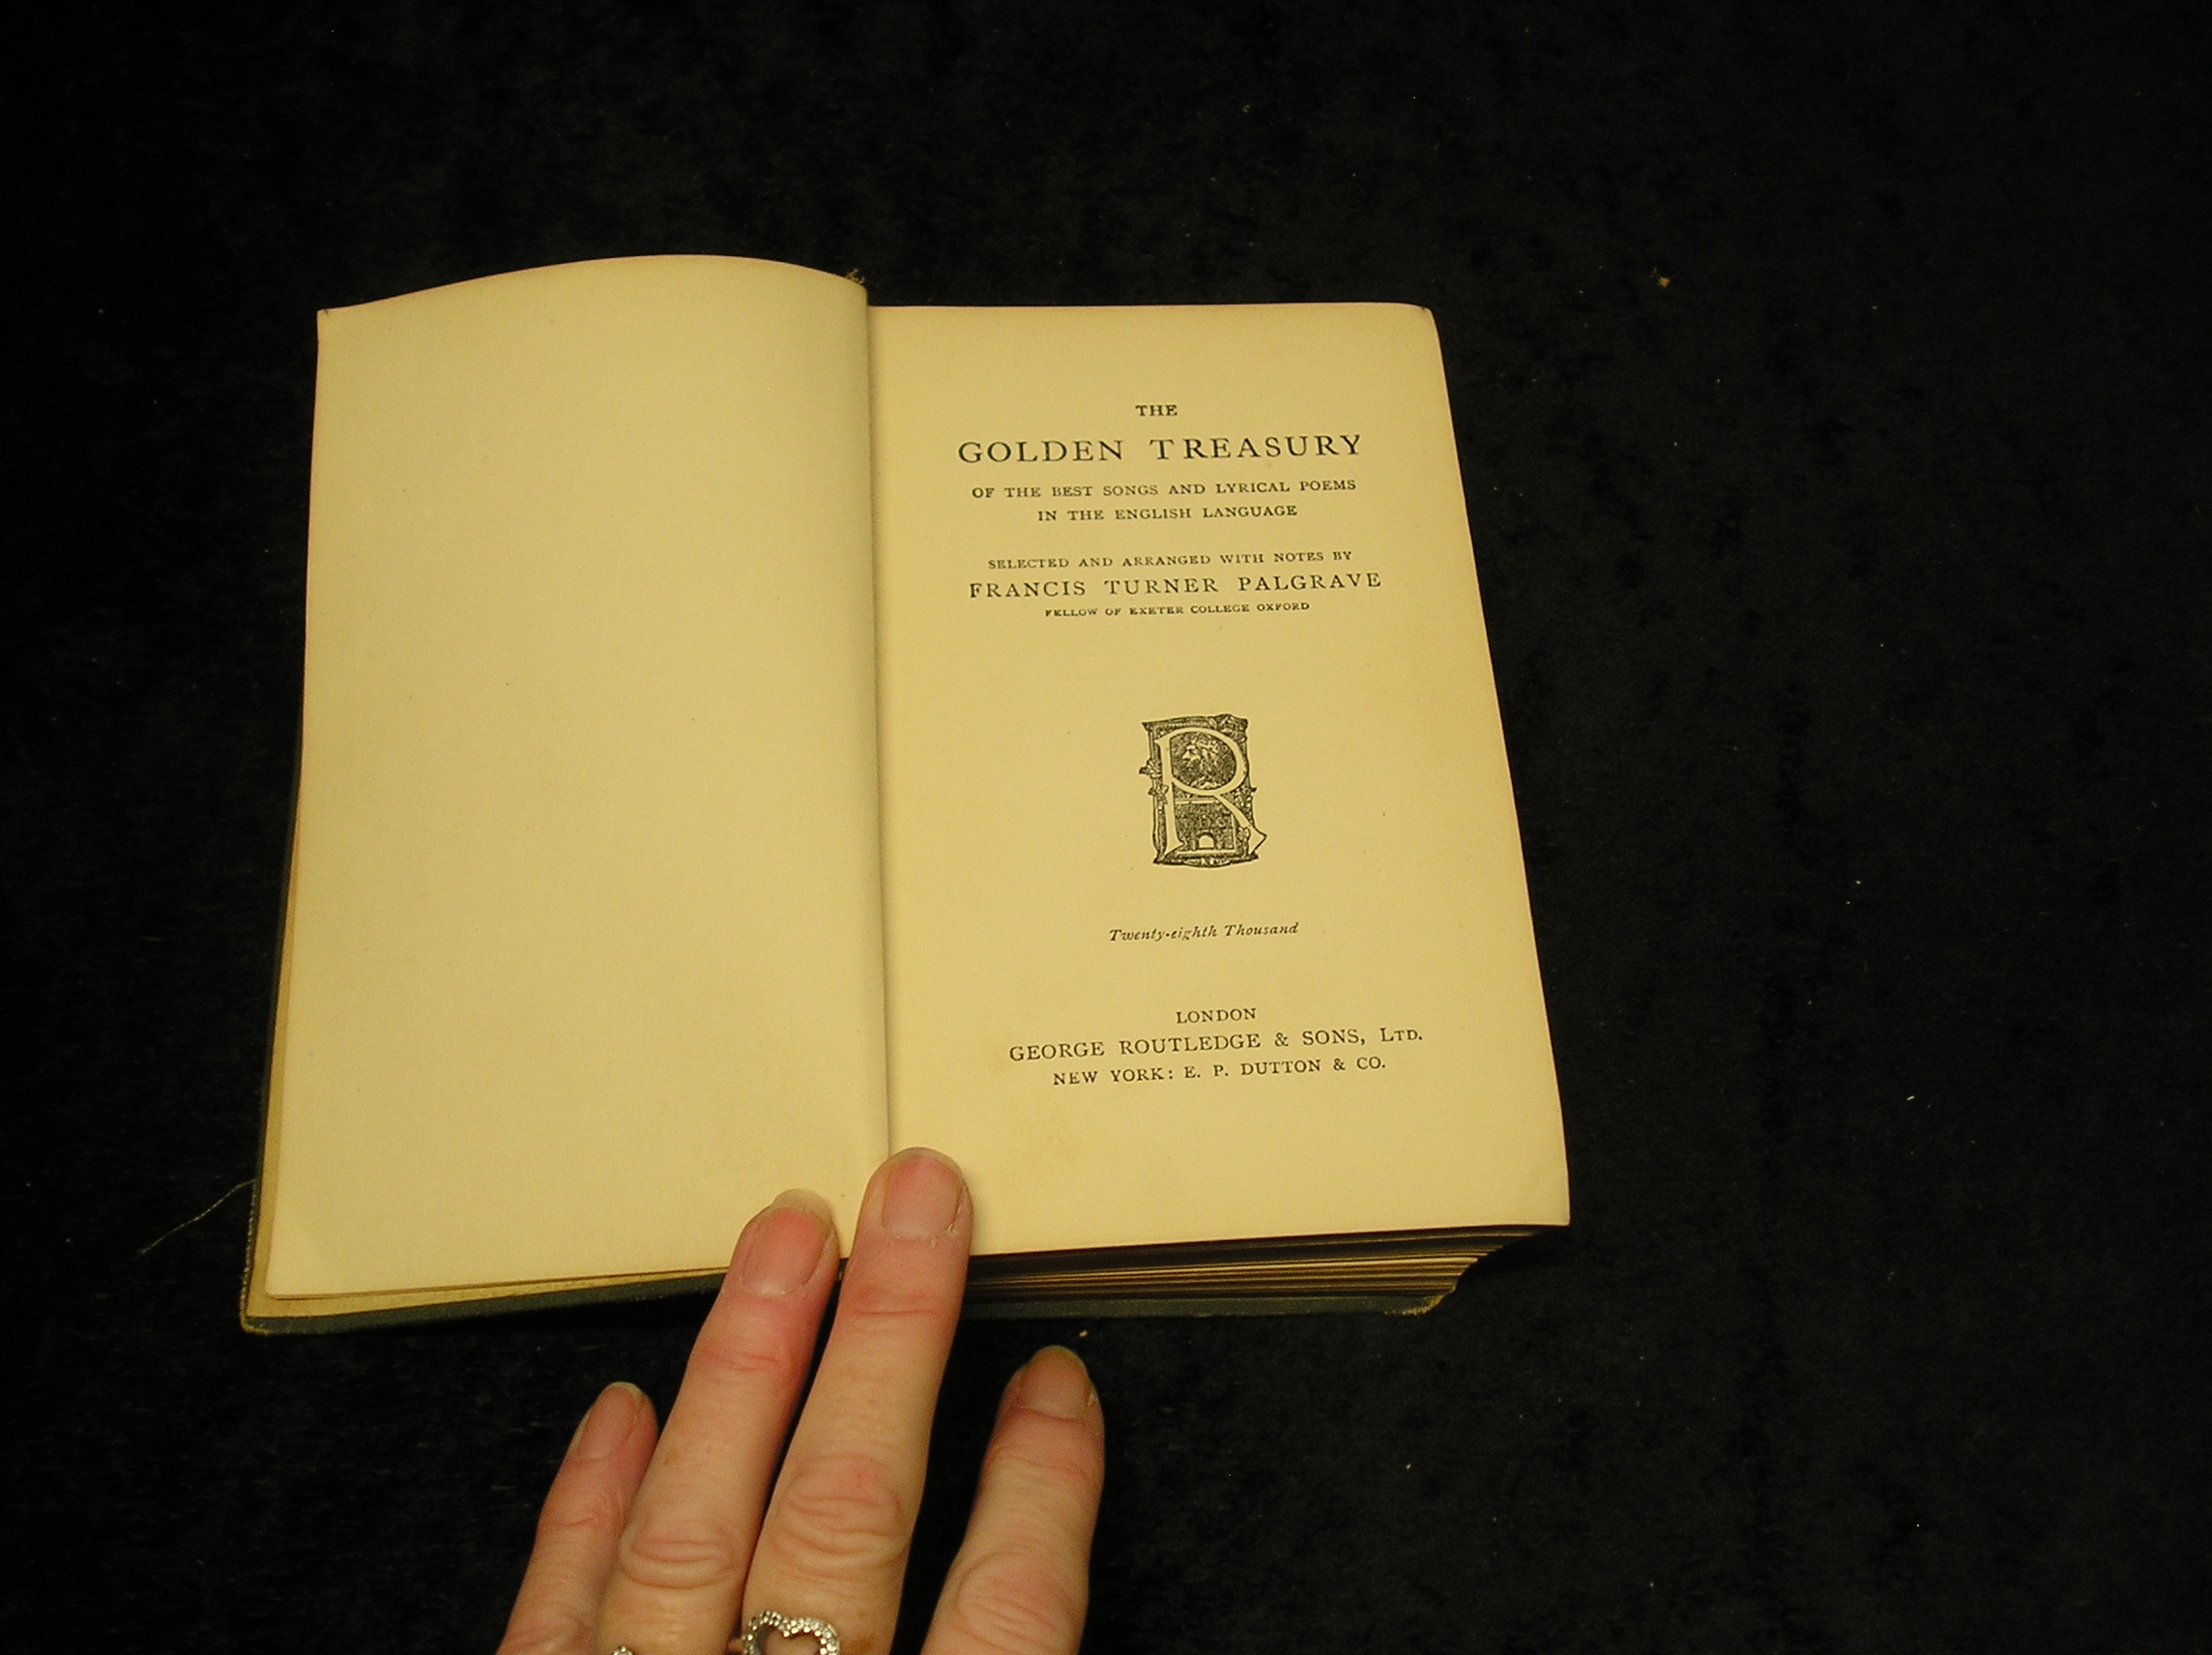 Image 0 of The Golden Treasury of The Best Songs and Lyrical Poems in the English Language